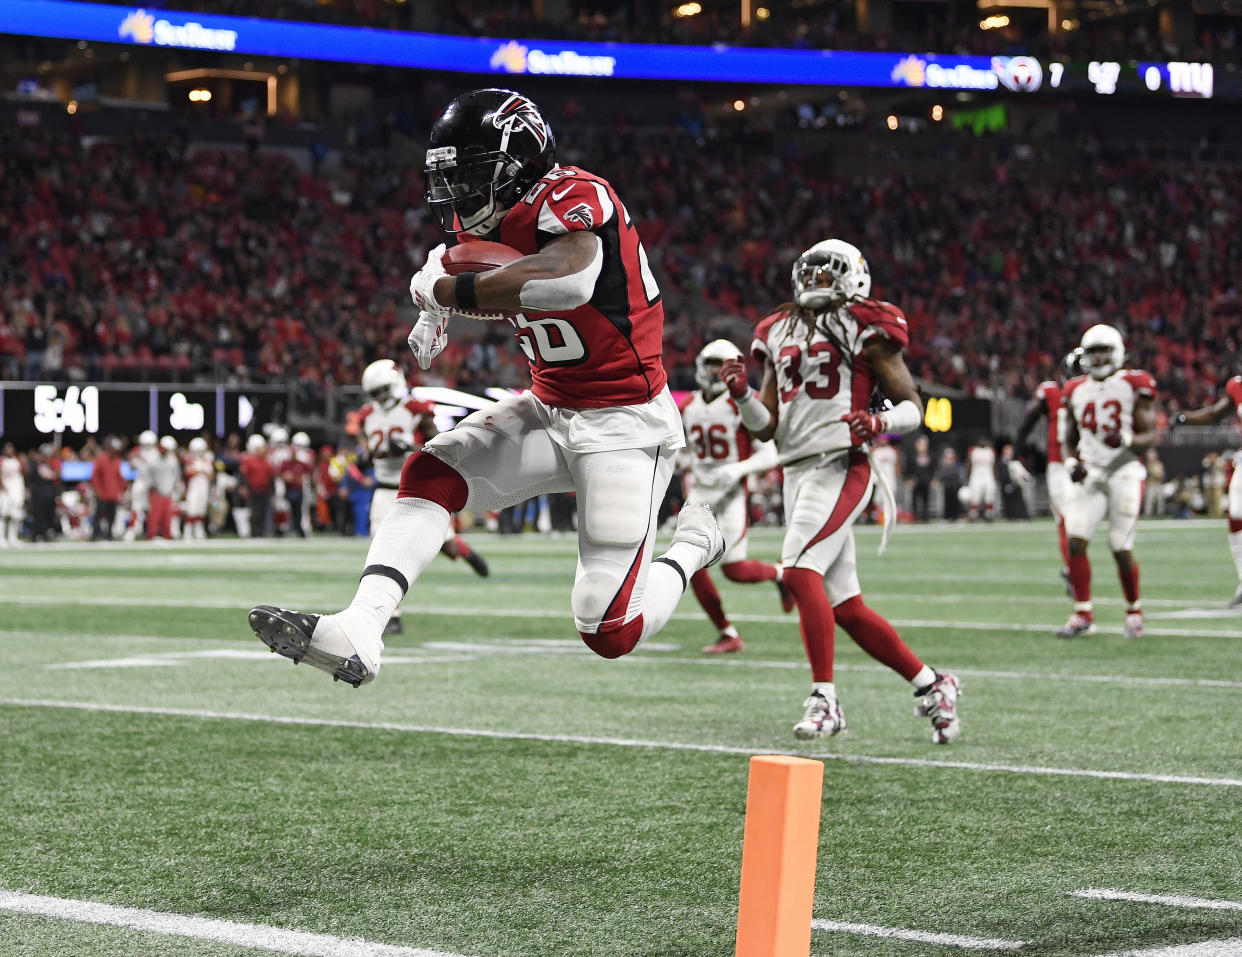 Atlanta Falcons running back Tevin Coleman (26) leaps into the end zone as he scores on a pass from Matt Ryan during the second half of an NFL football game against the Arizona Cardinals, Sunday, Dec. 16, 2018, in Atlanta. (AP Photo/Danny Karnik)